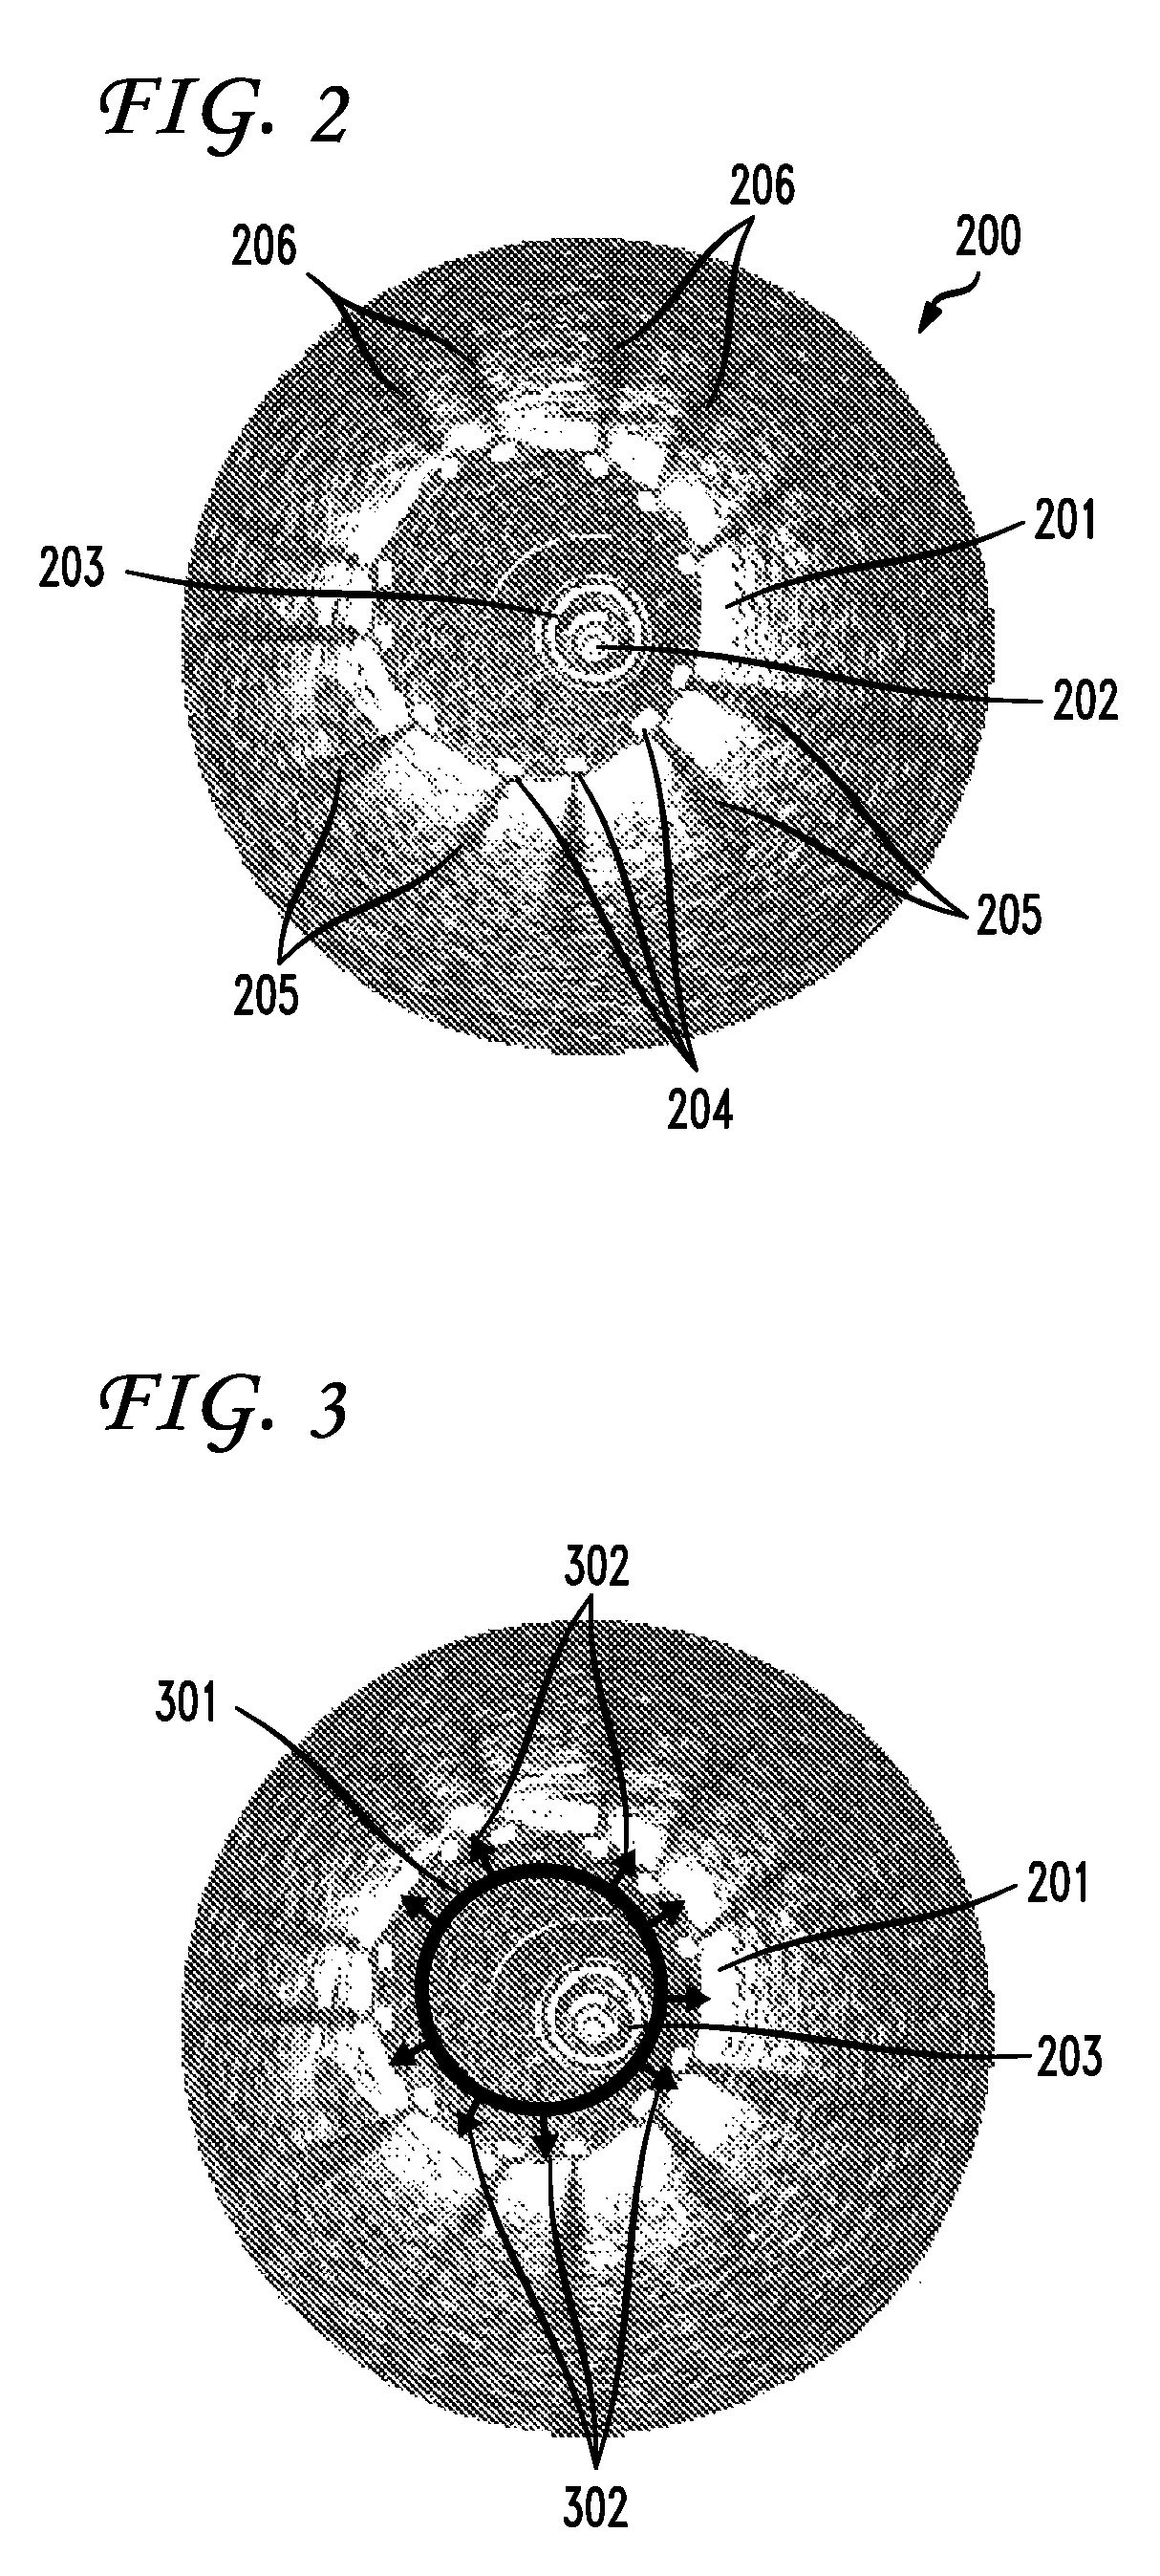 Method and apparatus for inner wall extraction and stent strut detection using intravascular optical coherence tomography imaging